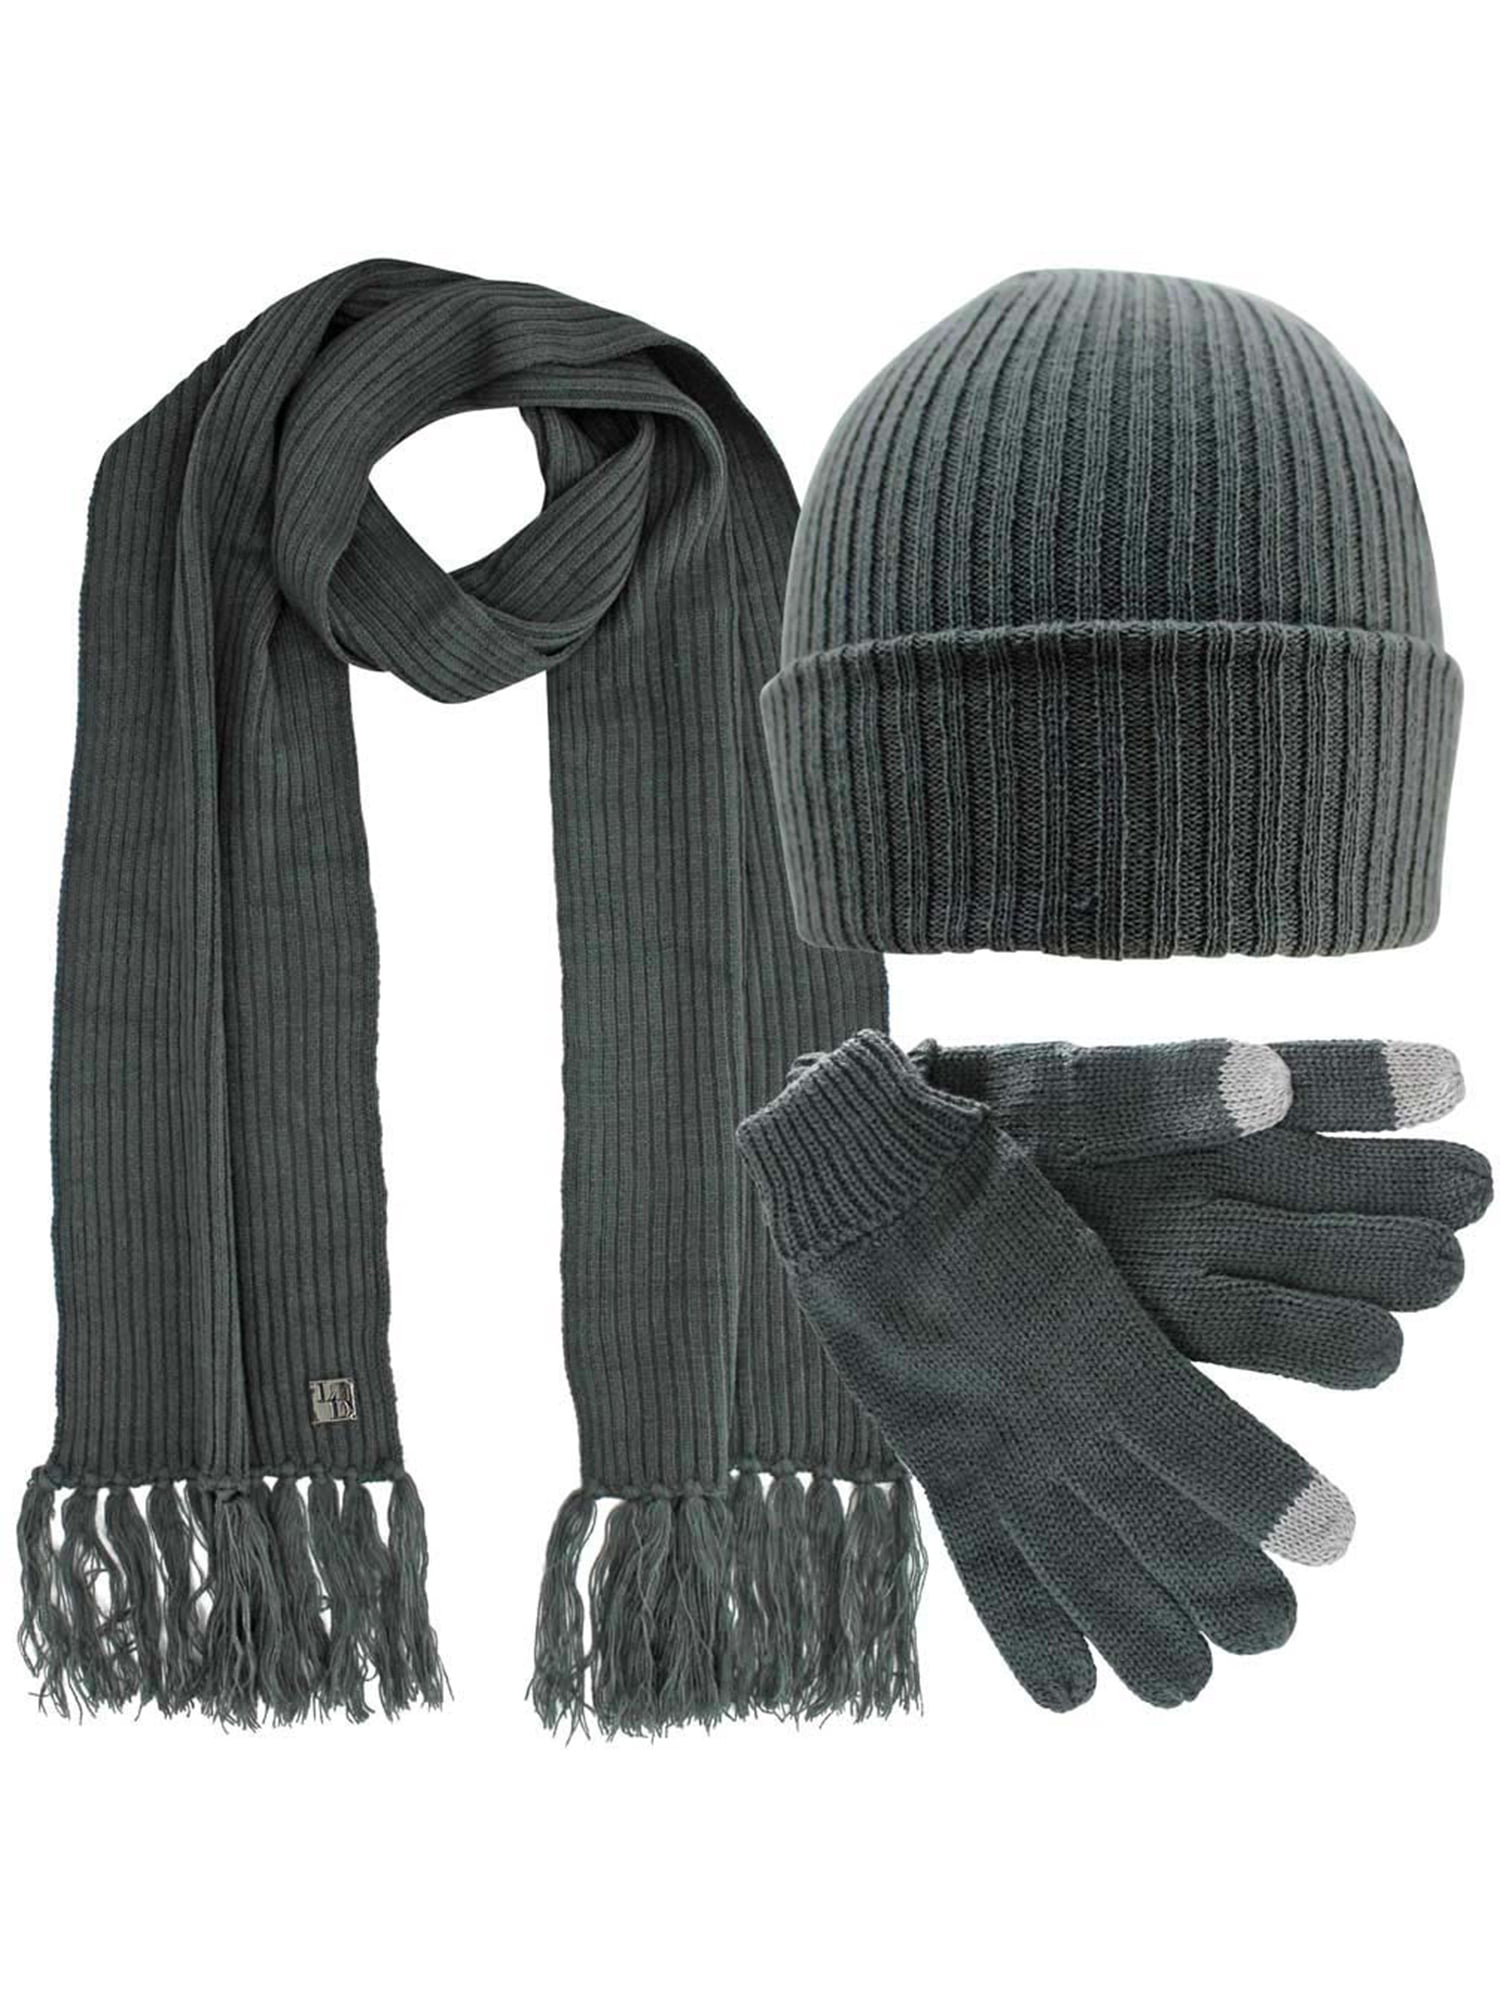 Charcoal Grey Ribbed Knit Men's 3 Piece Hat Scarf & Texting Gloves Set ...